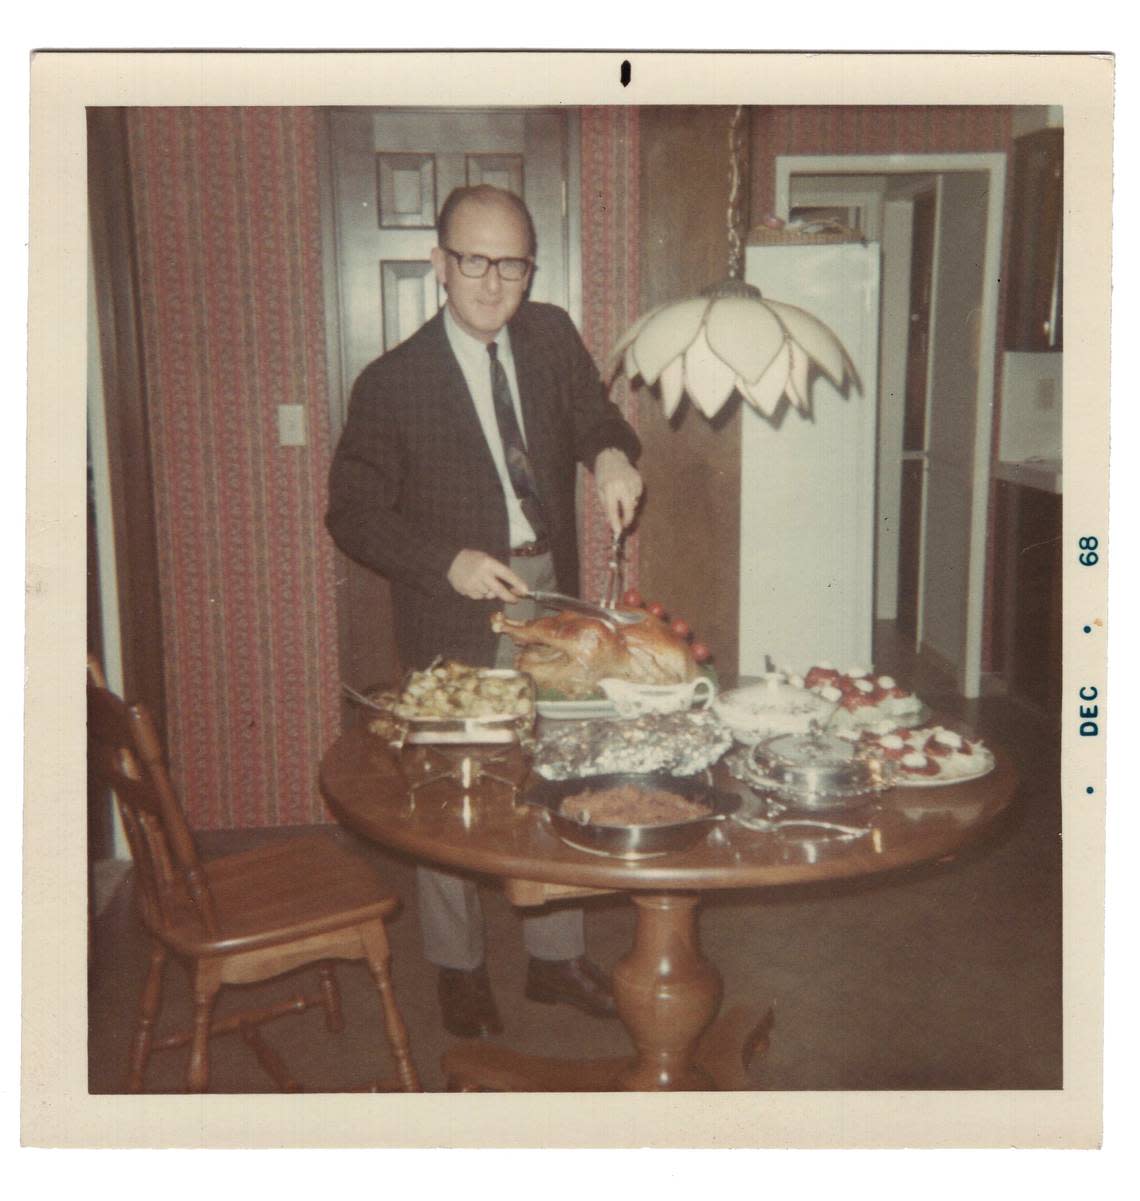 Howard Staples pictured in 1968. Howard was brother to Ruth, whose married surname became Kletzing. This photograph was sold at Schiff Estate Services on a Del Paso Boulevard in Sacramento in December.